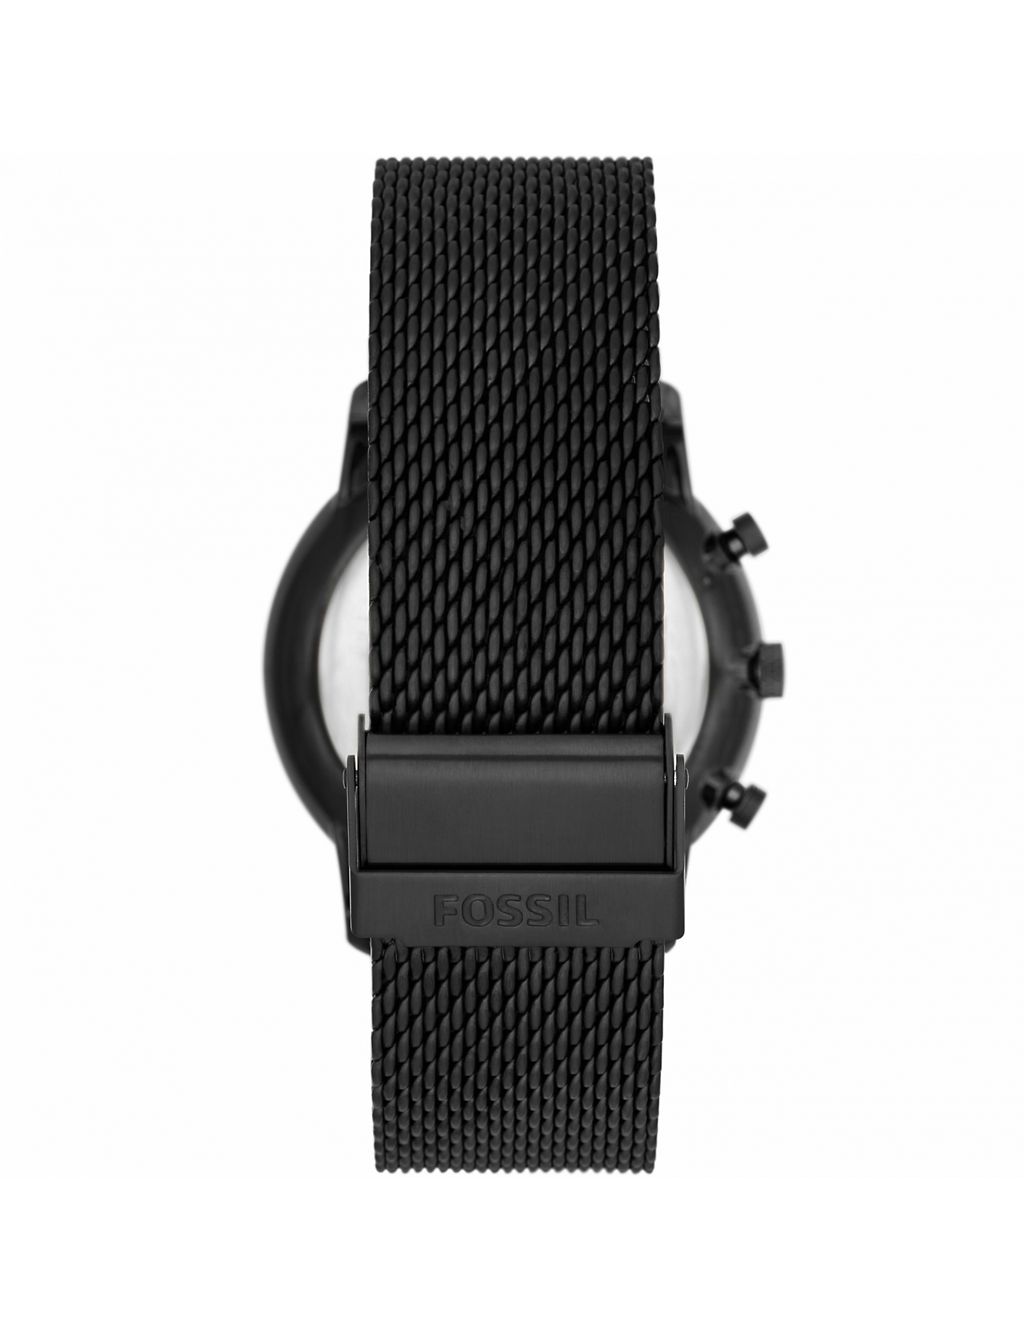 Fossil Minimalist Black Stainless Steel Watch 1 of 8